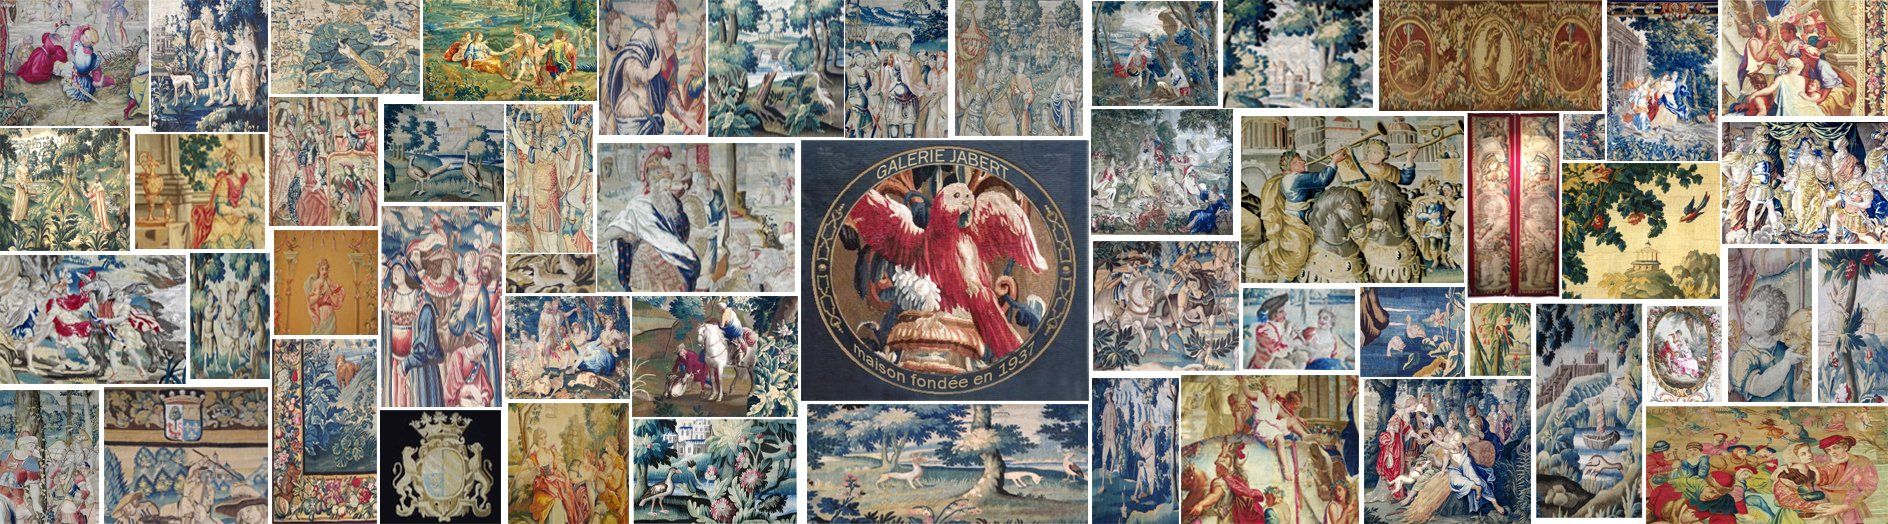 Old Tapestry Aubusson - in Pariss